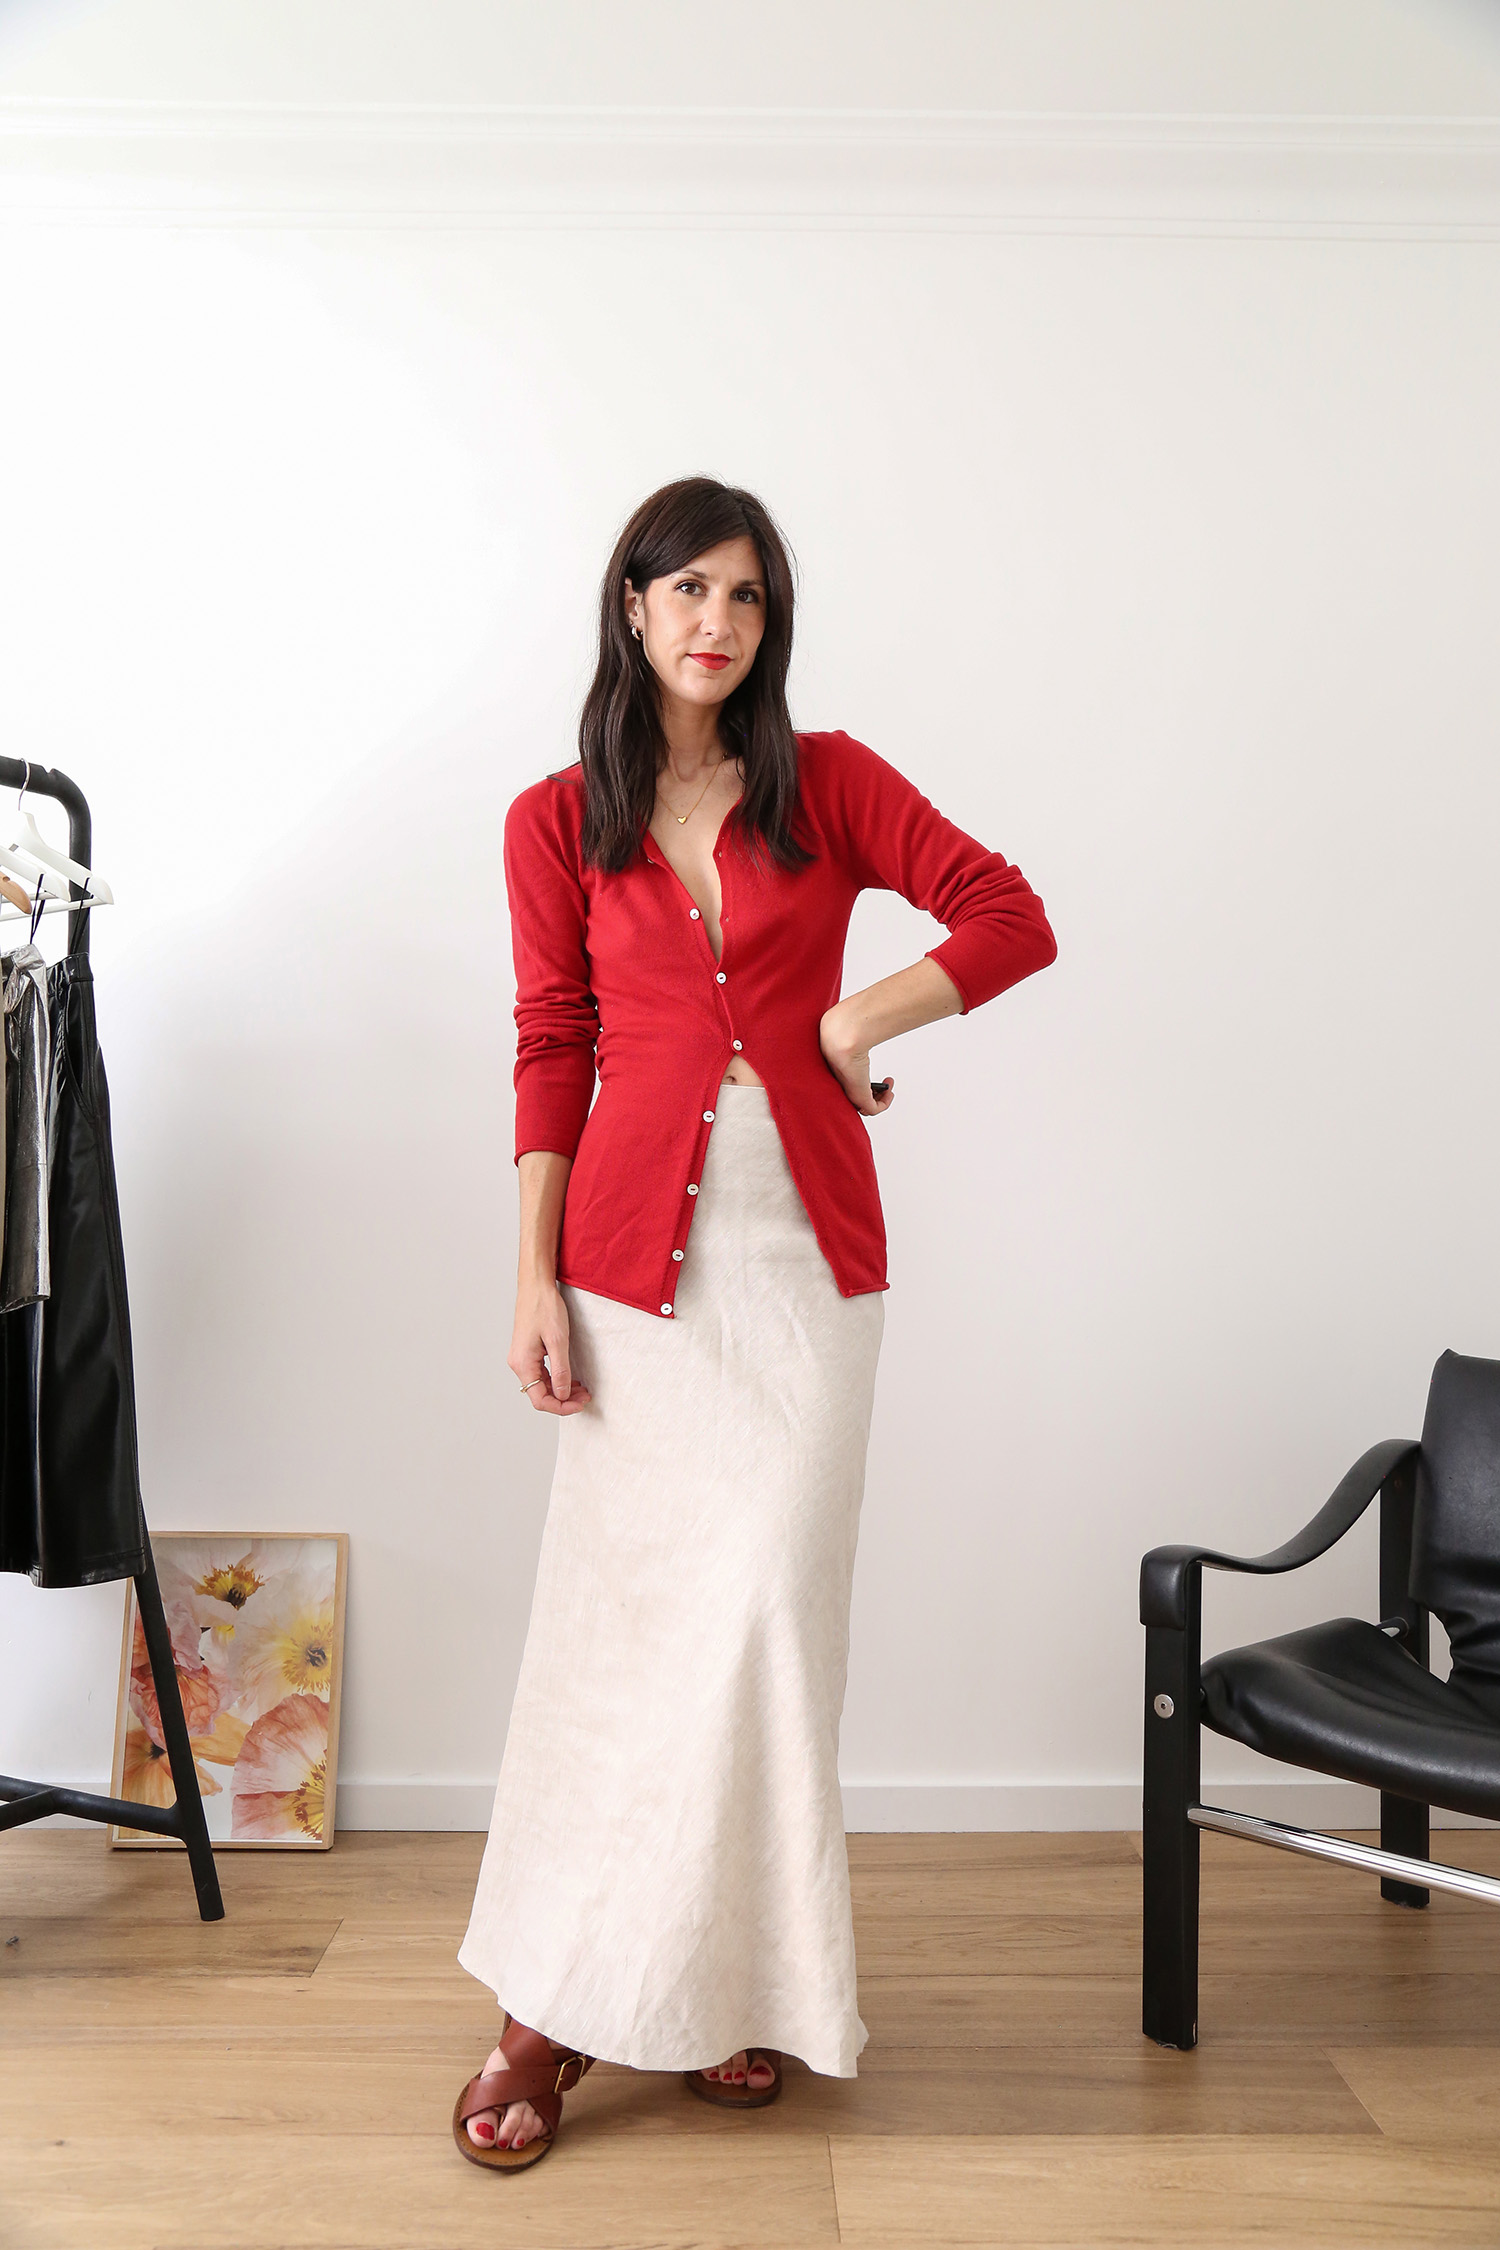 How to style a red cardigan worn with a neutral maxi